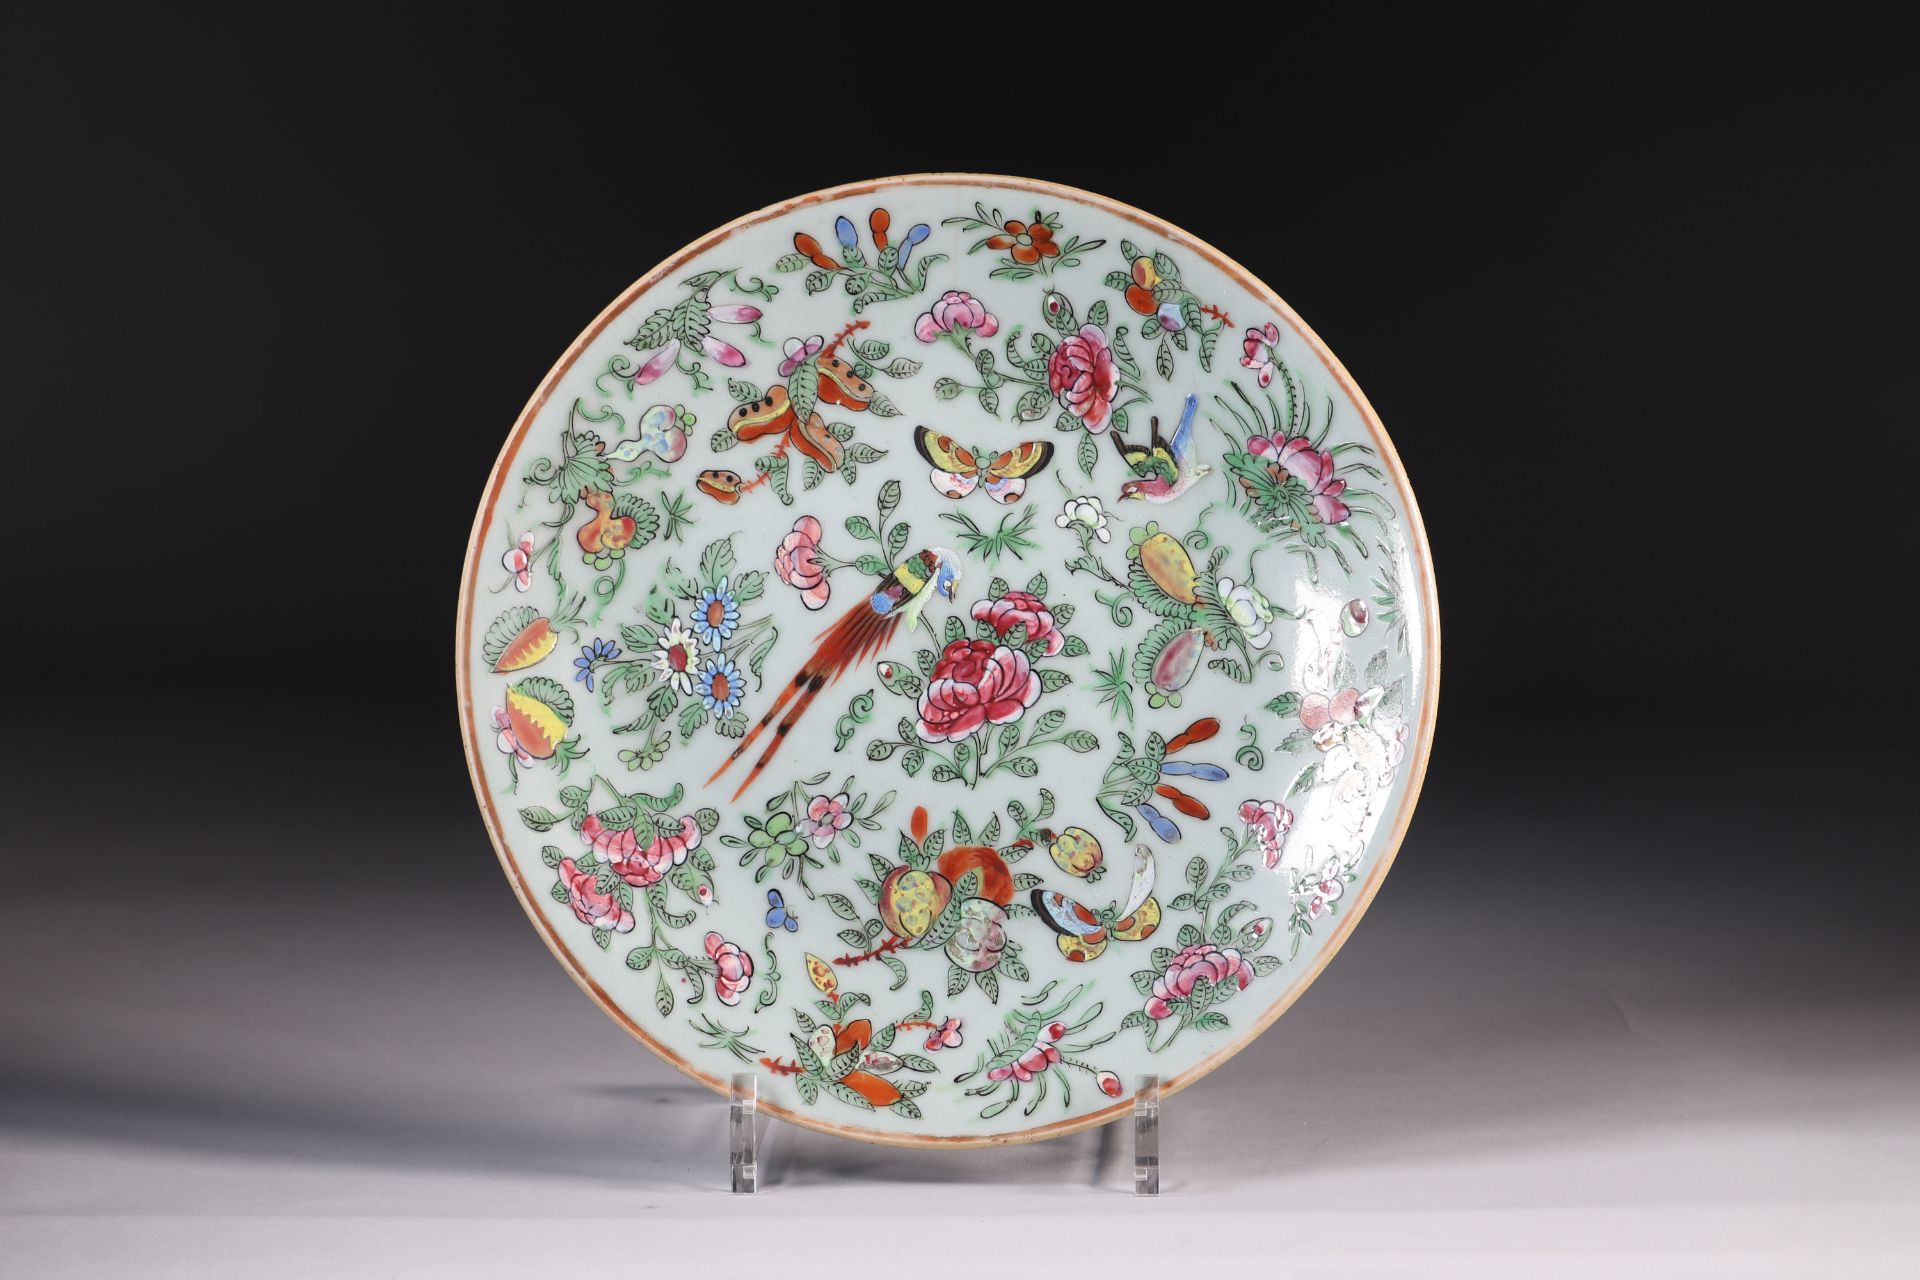 China Canton Porcelain Plate 19th